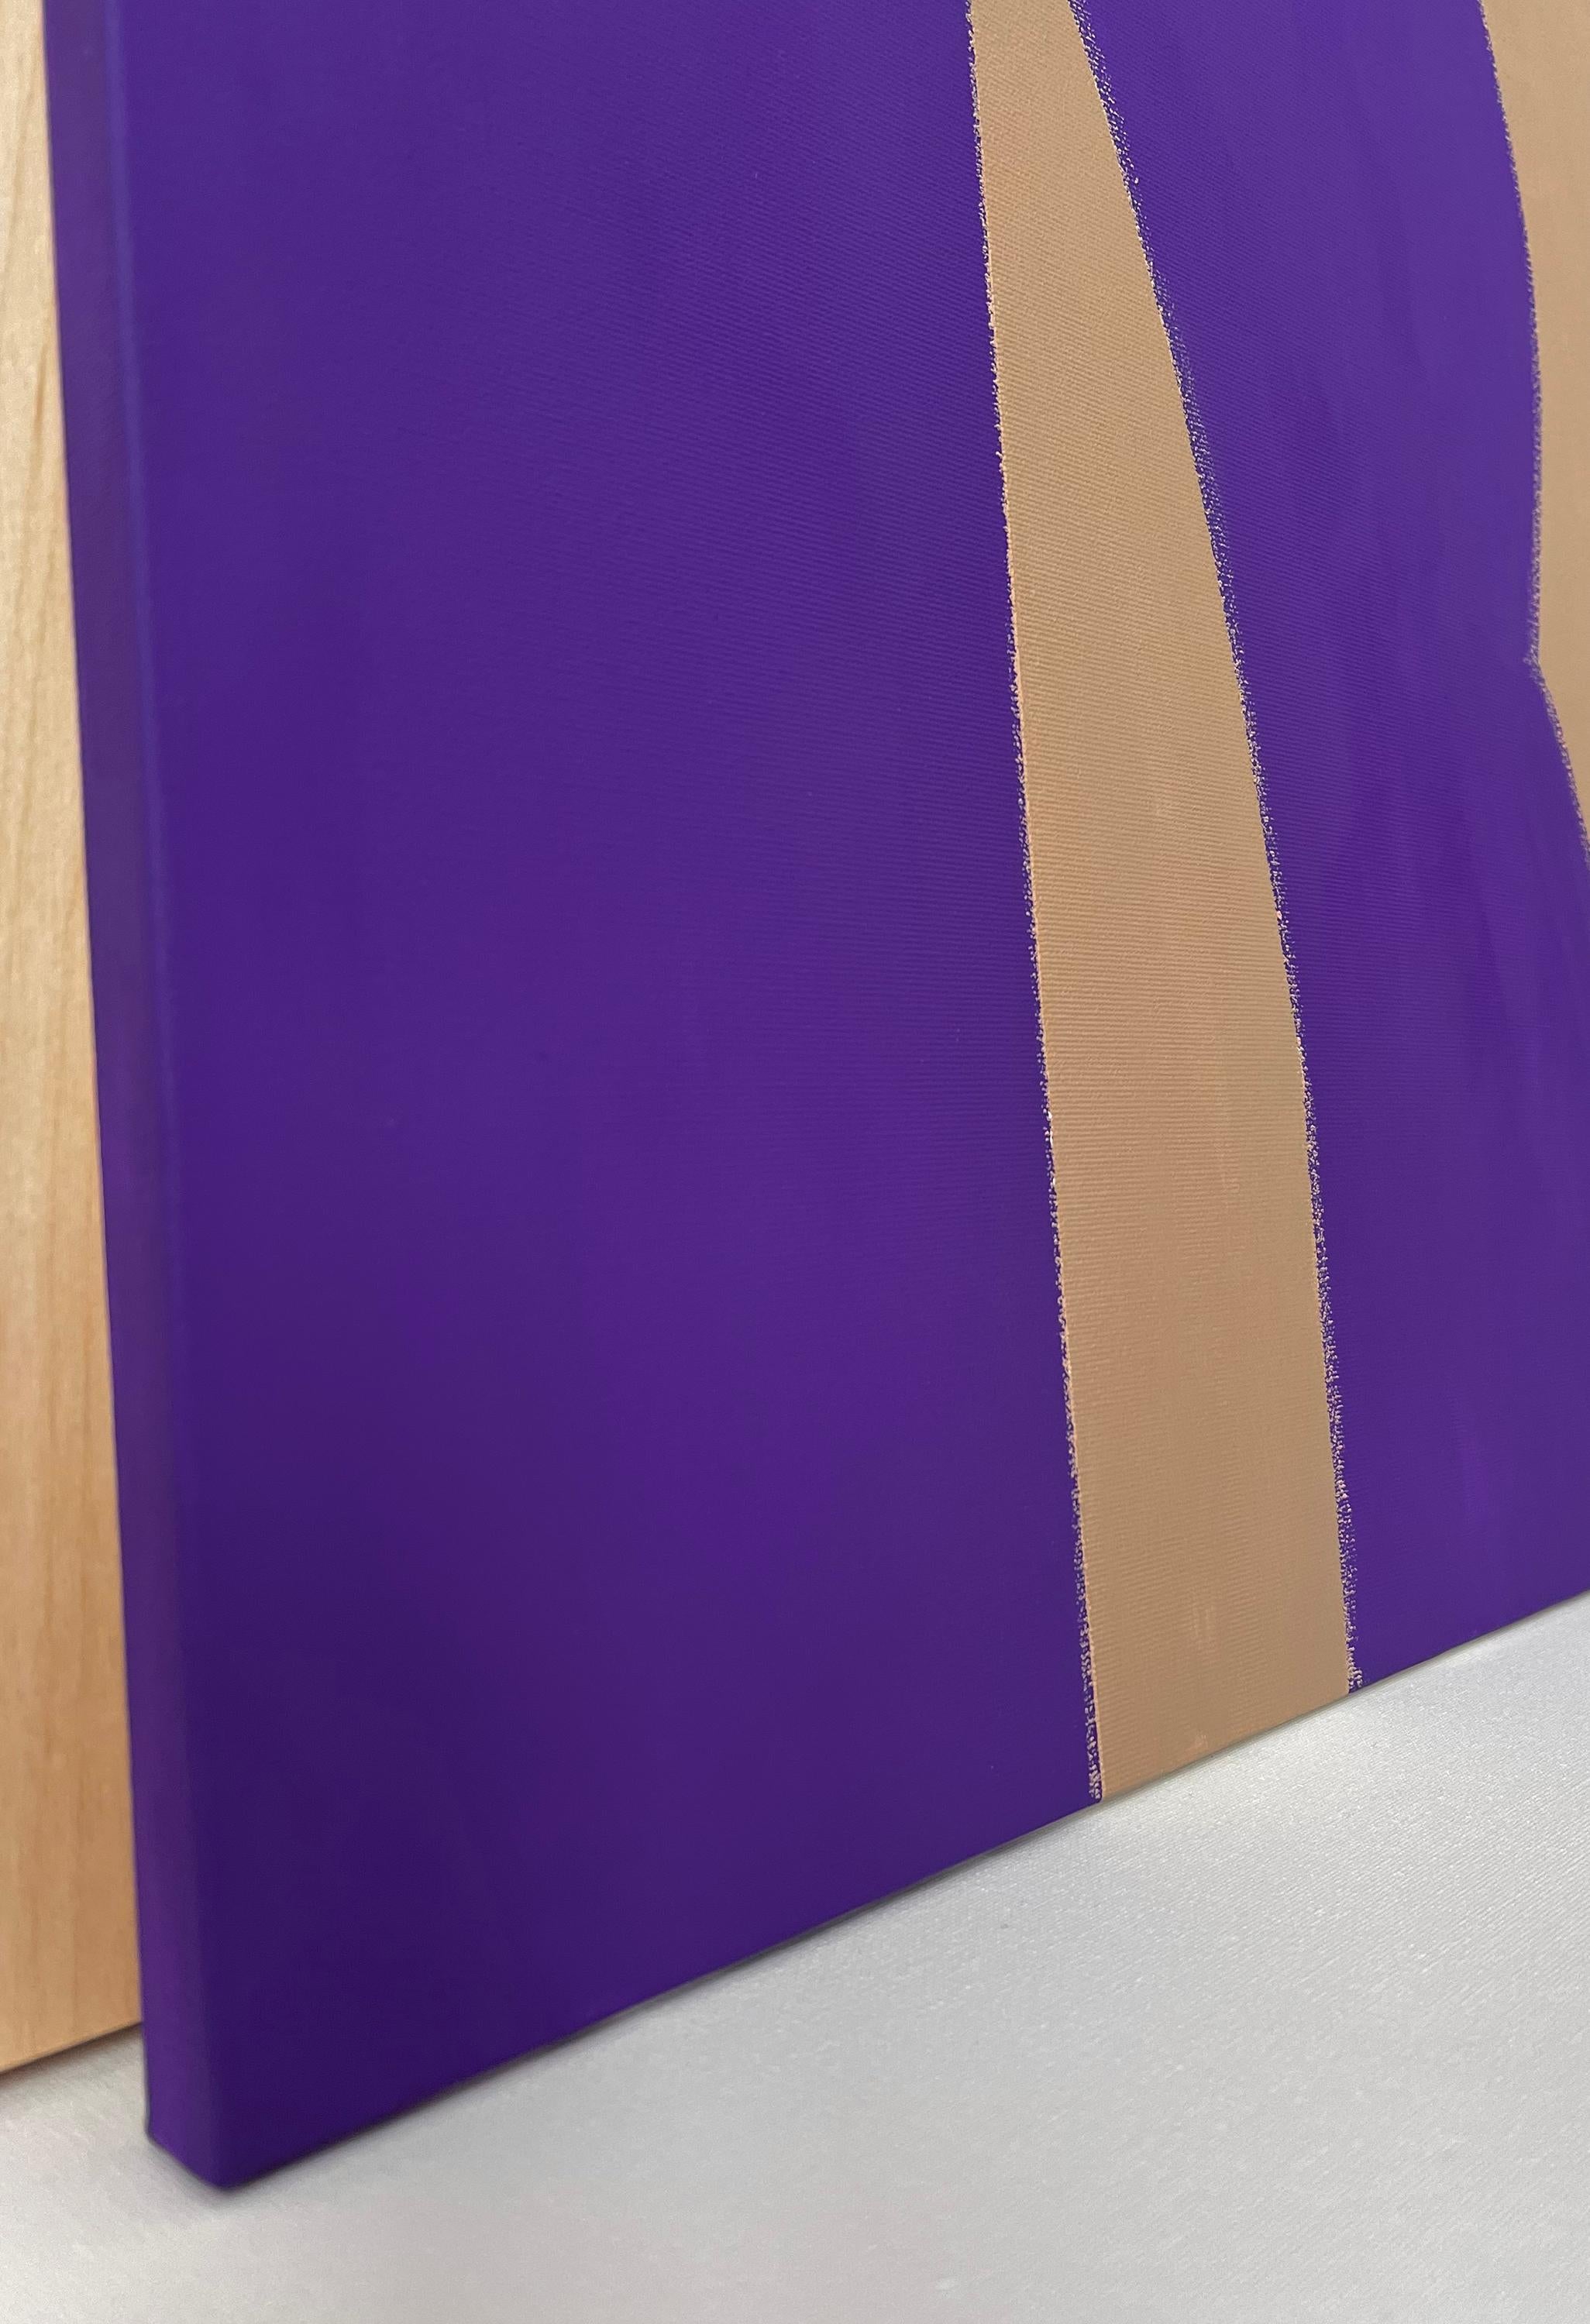 A minimalistic painting adorned with vertical purple stripes, the deliberate simplicity accentuates the profound mystery embedded within the artwork, inviting viewers to explore the enigmatic depths of the composition.
This work is signed by Artist